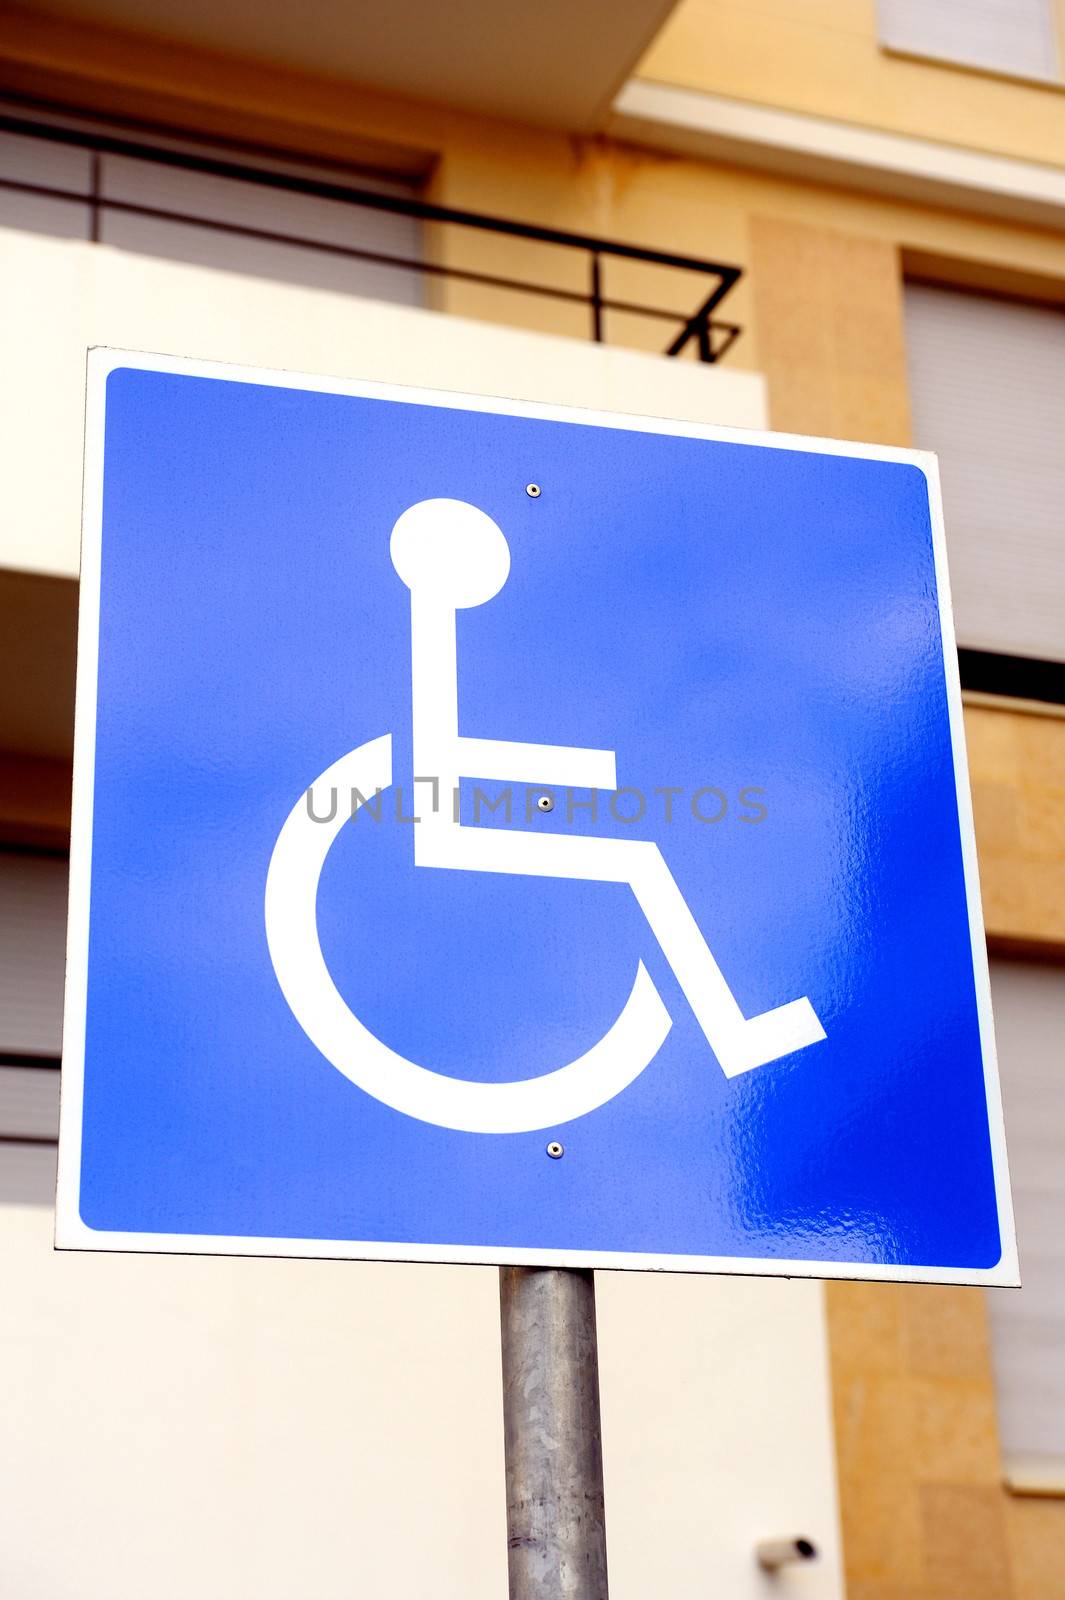 Parking space for disabled before a new building